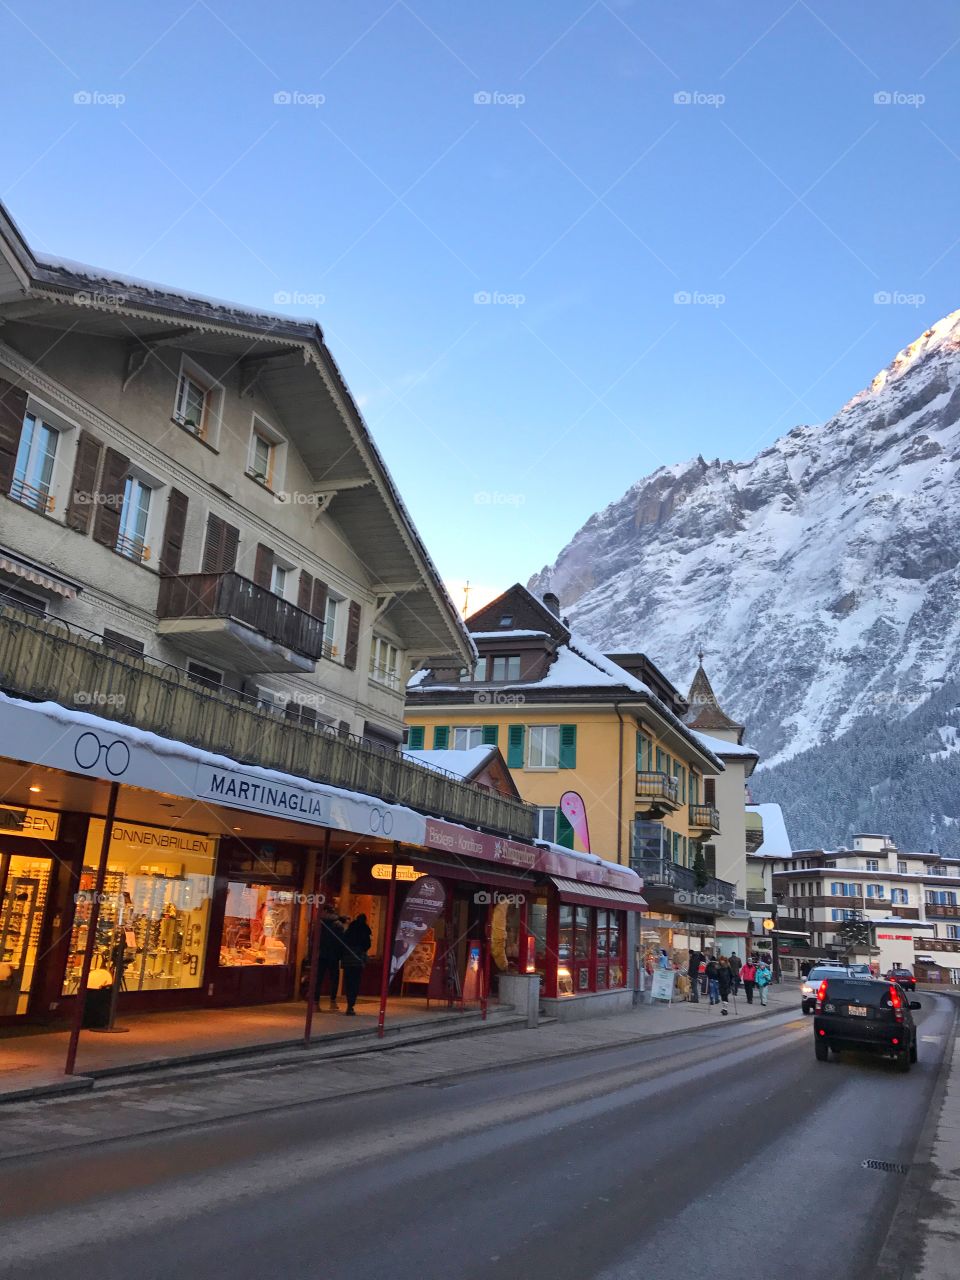 Shops and alps view in Grindelwald, Switzerland 